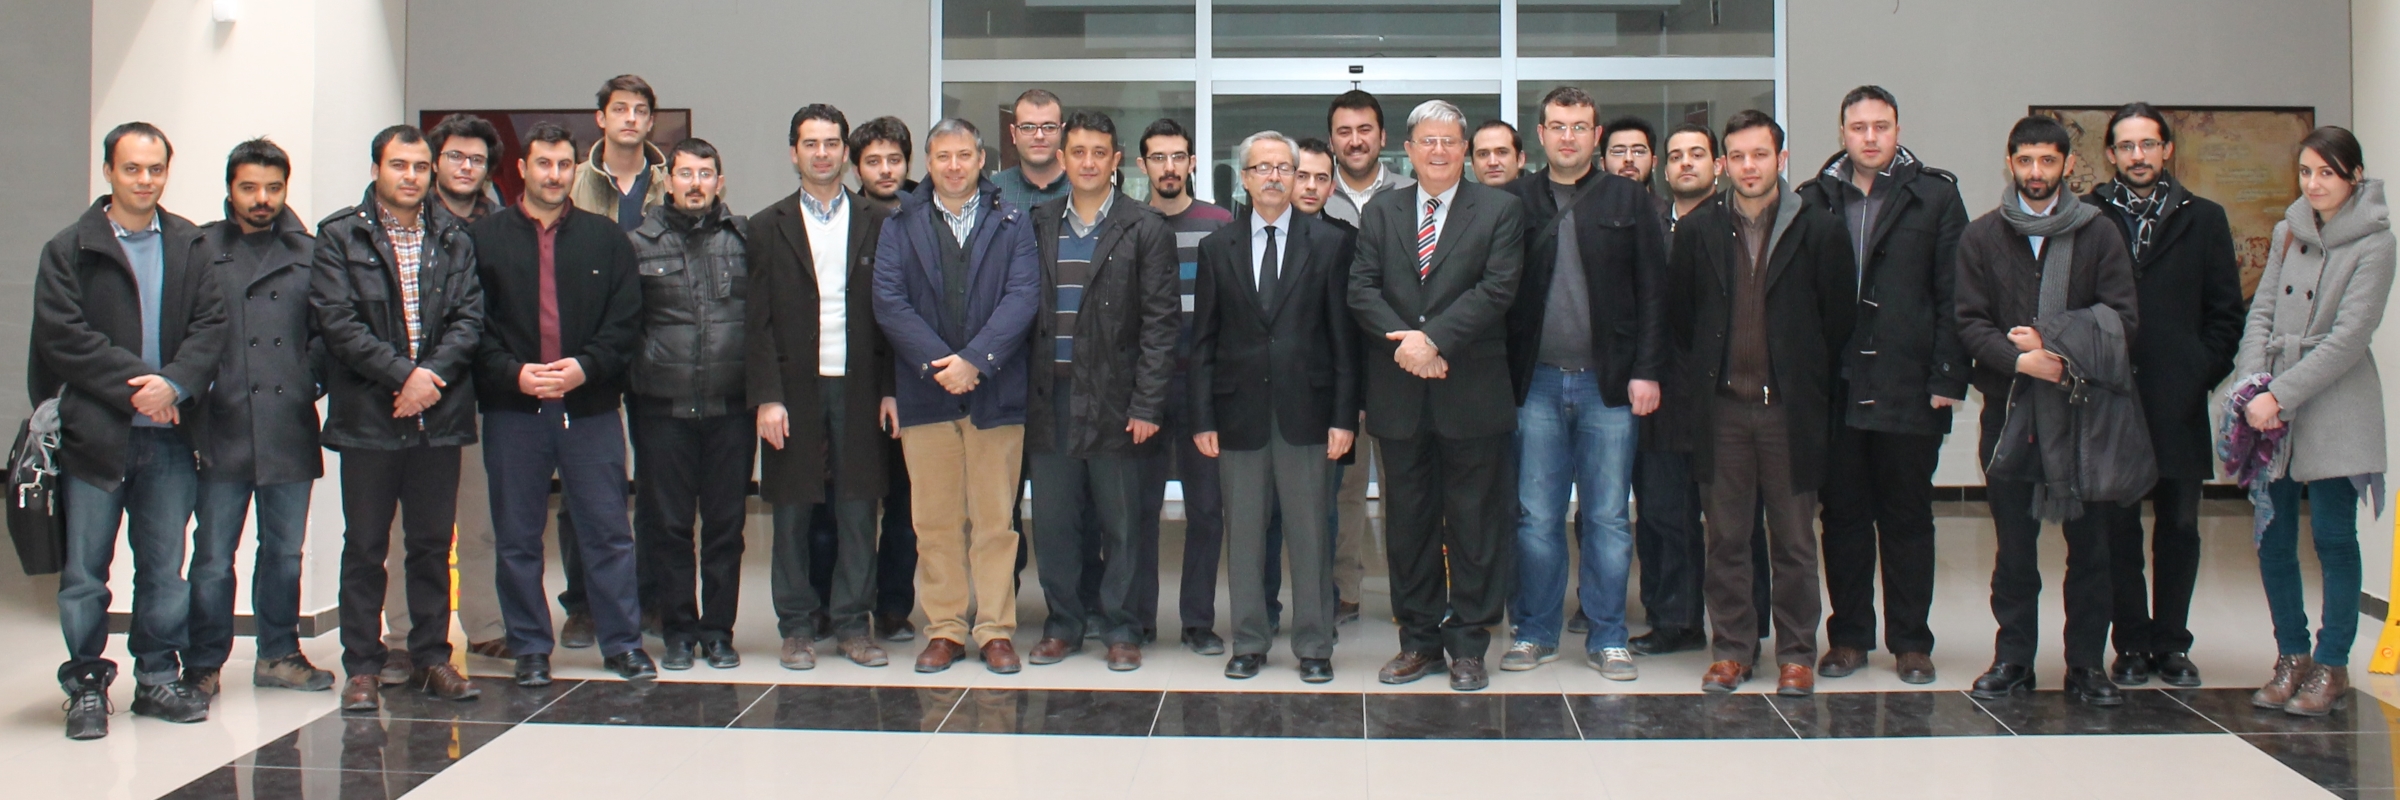 Kinematic Synthesis Winter School - Erciyes University, 2014